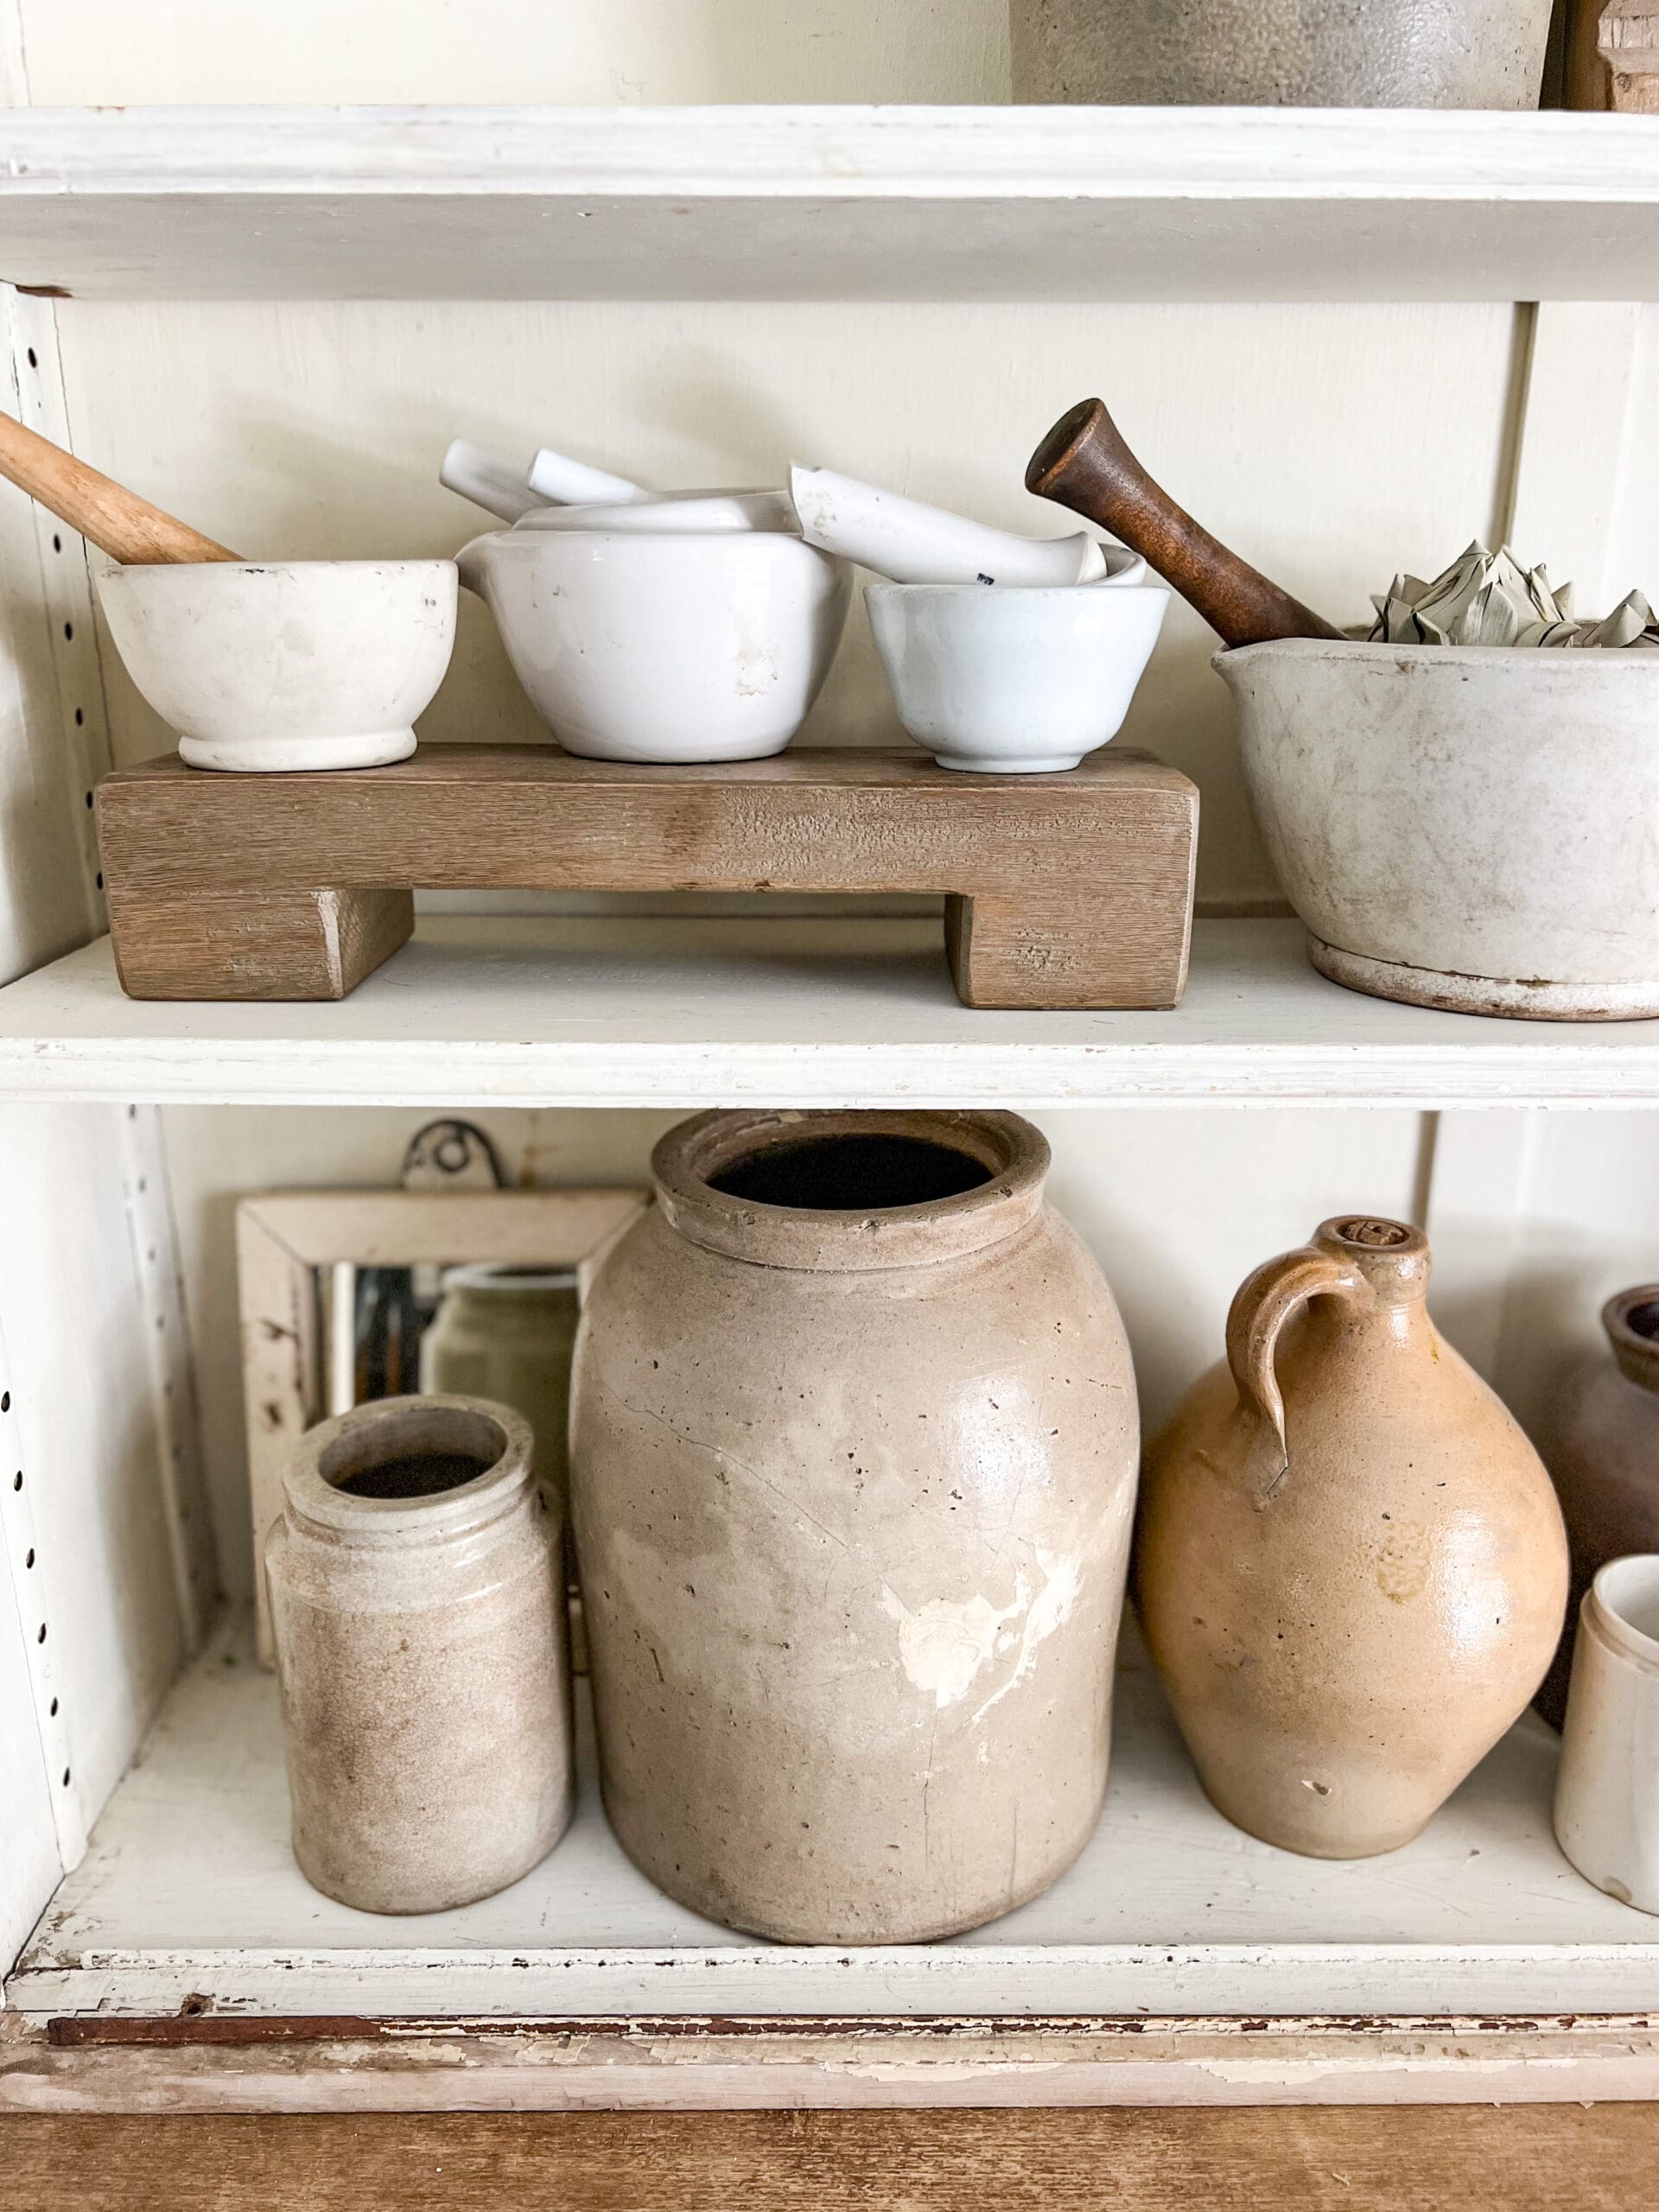 different sizes of crocks and mortar and pestles styled on apothecary shelves